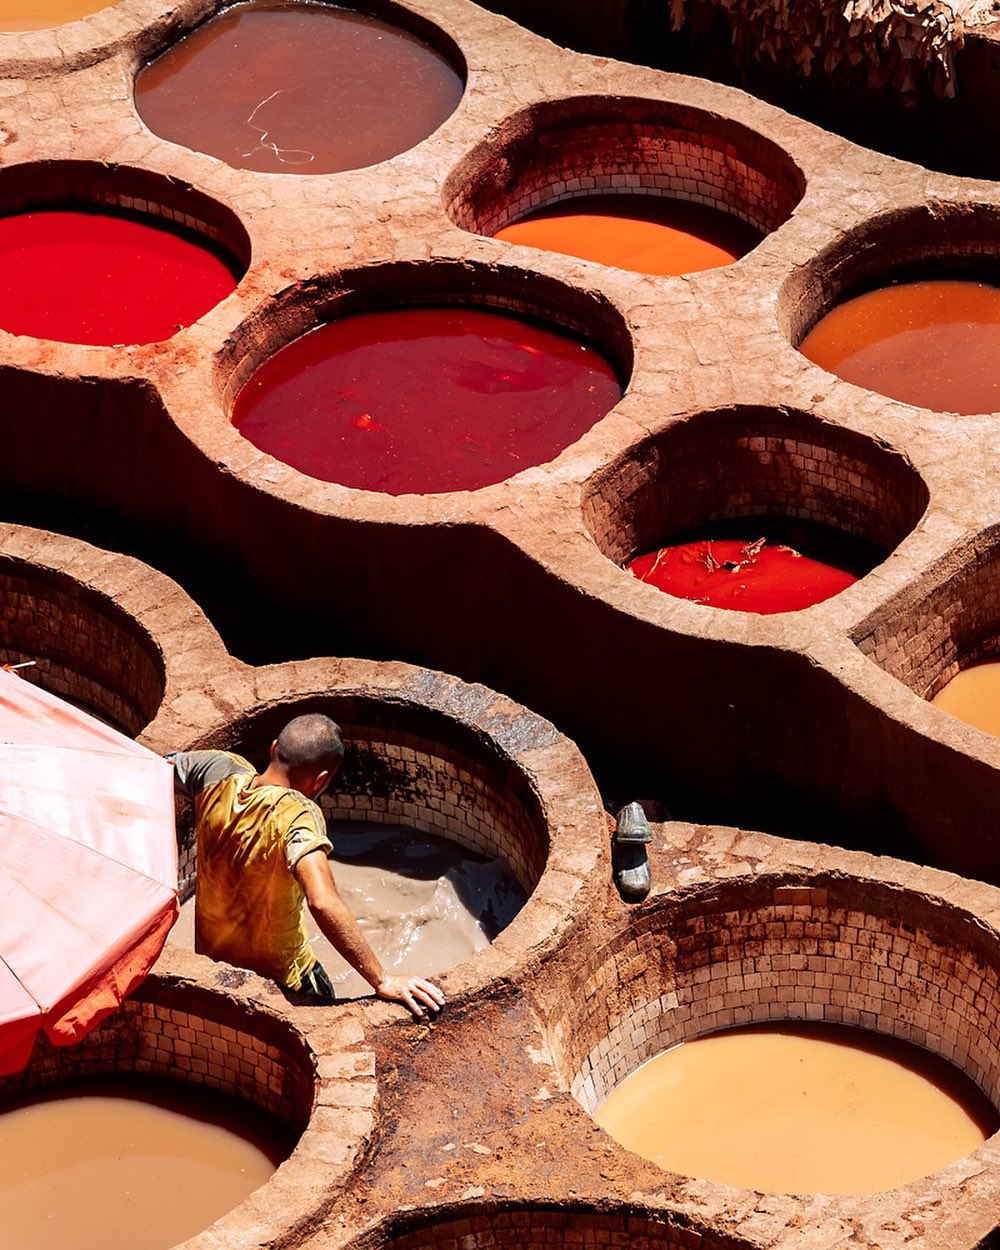 The Colorful Tanneries of Fez